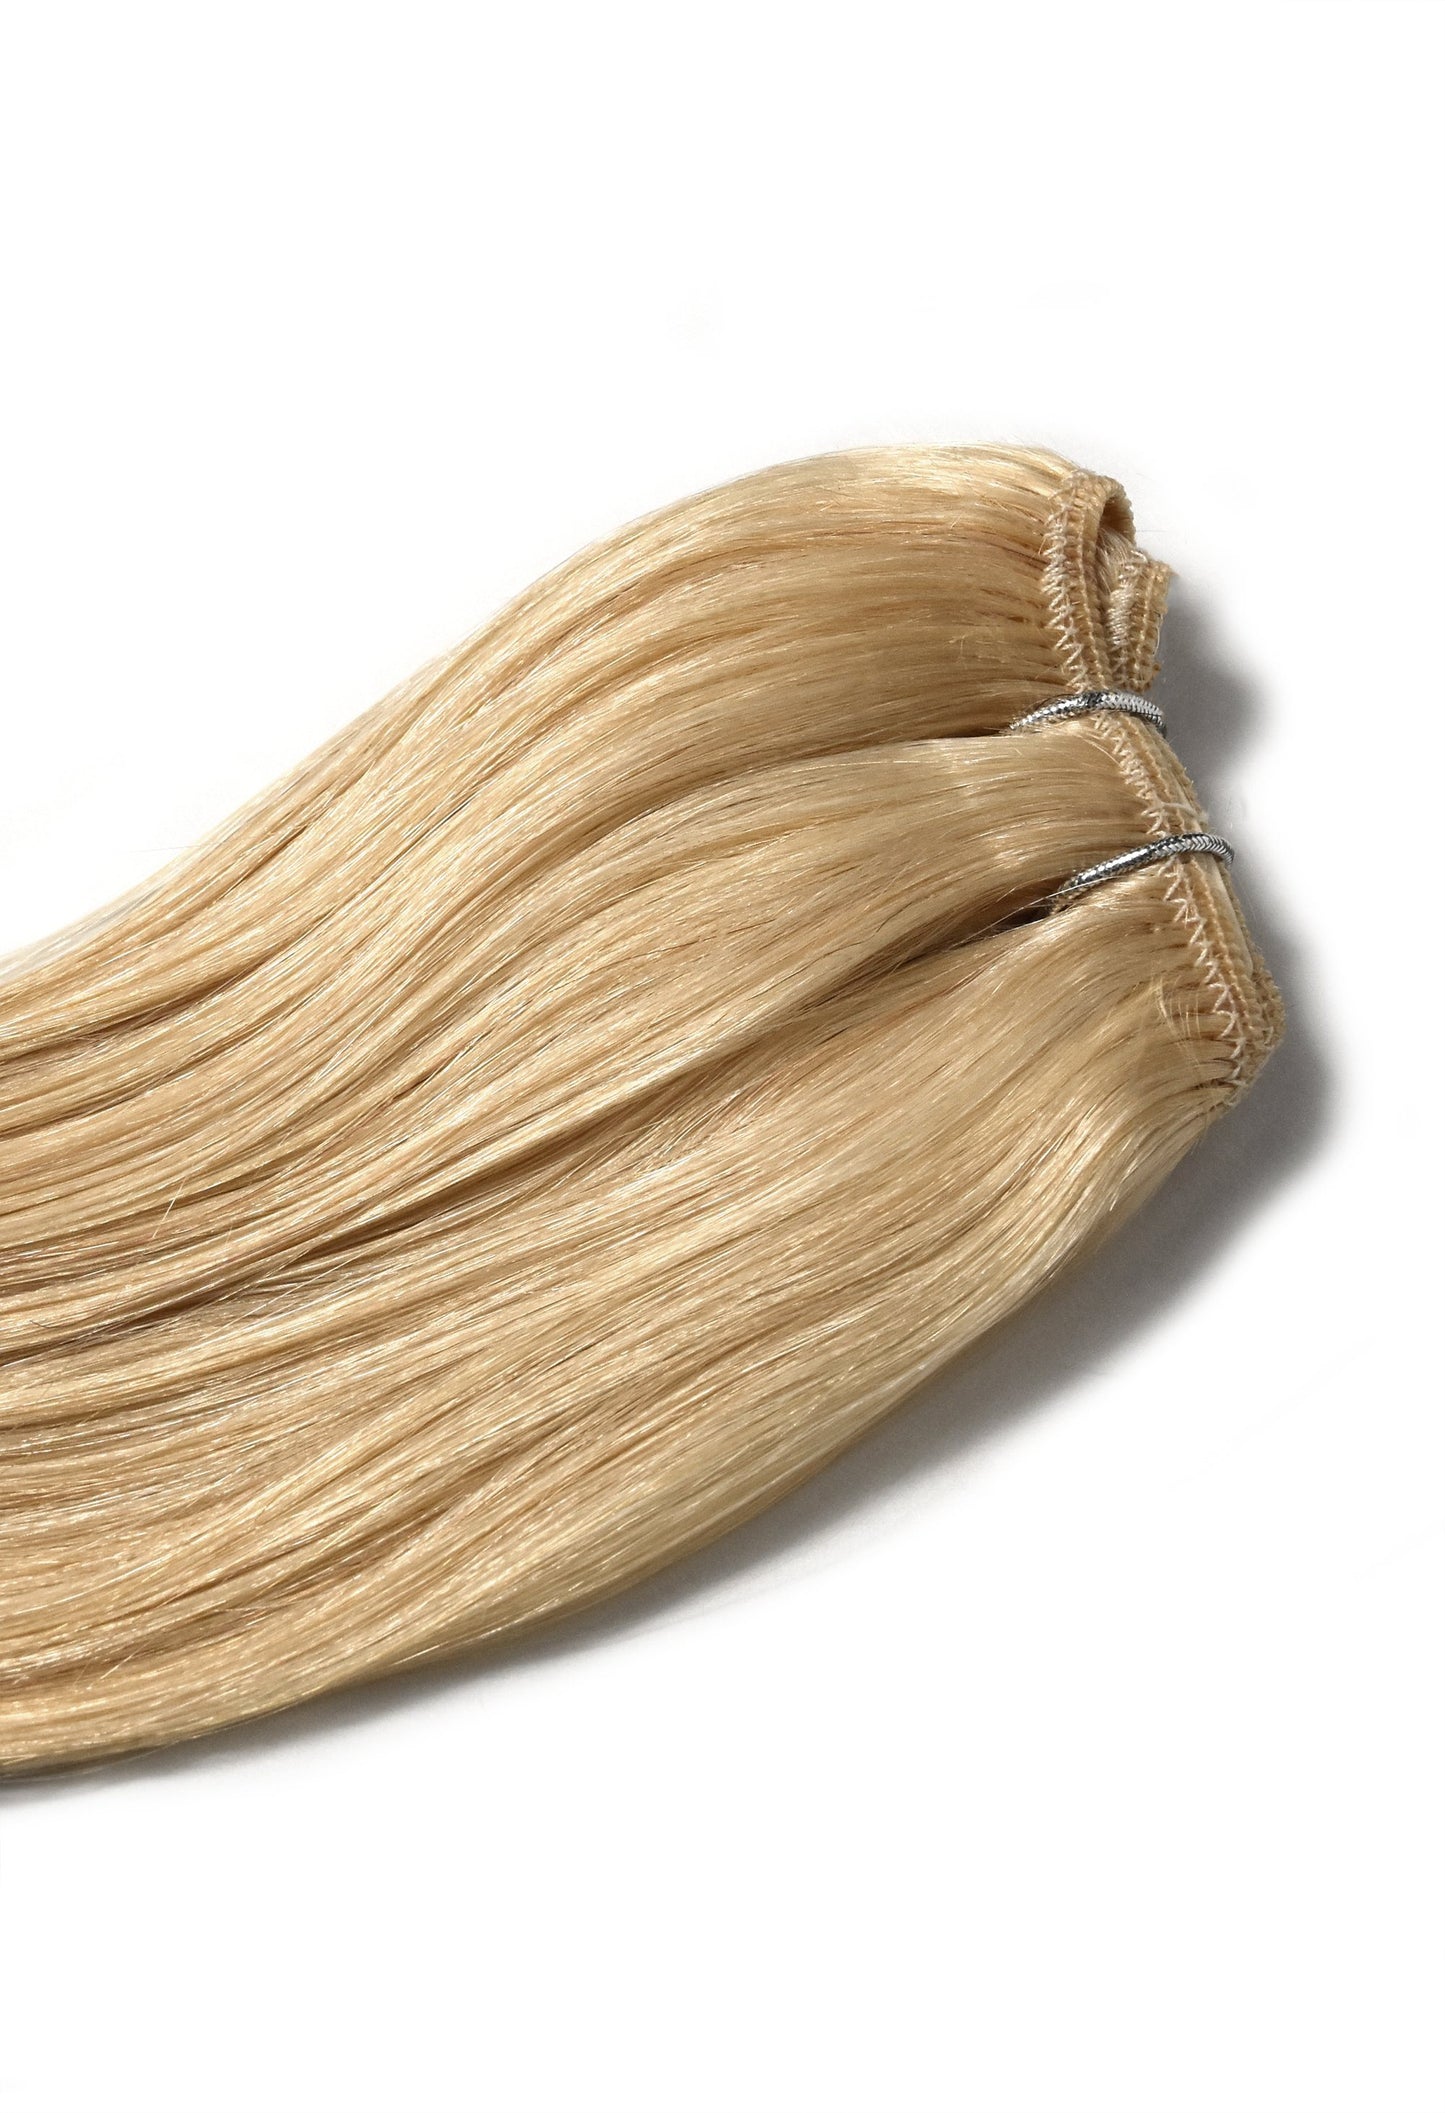 golden blonde hair pieces clip in extensions